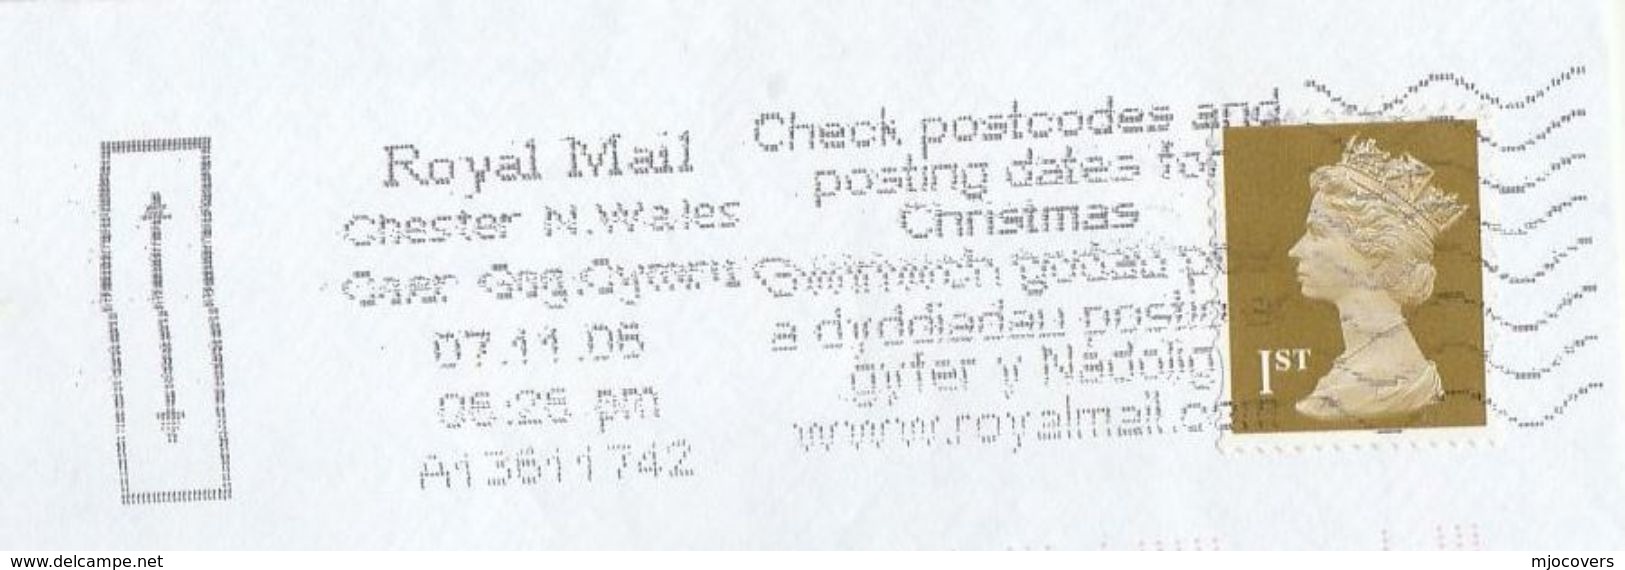 2006 Chester GB COVER SLOGAN Pmk CHECK POSTCODE AND POSTING DATES FOR CHRISTMAS, Stamps - Covers & Documents